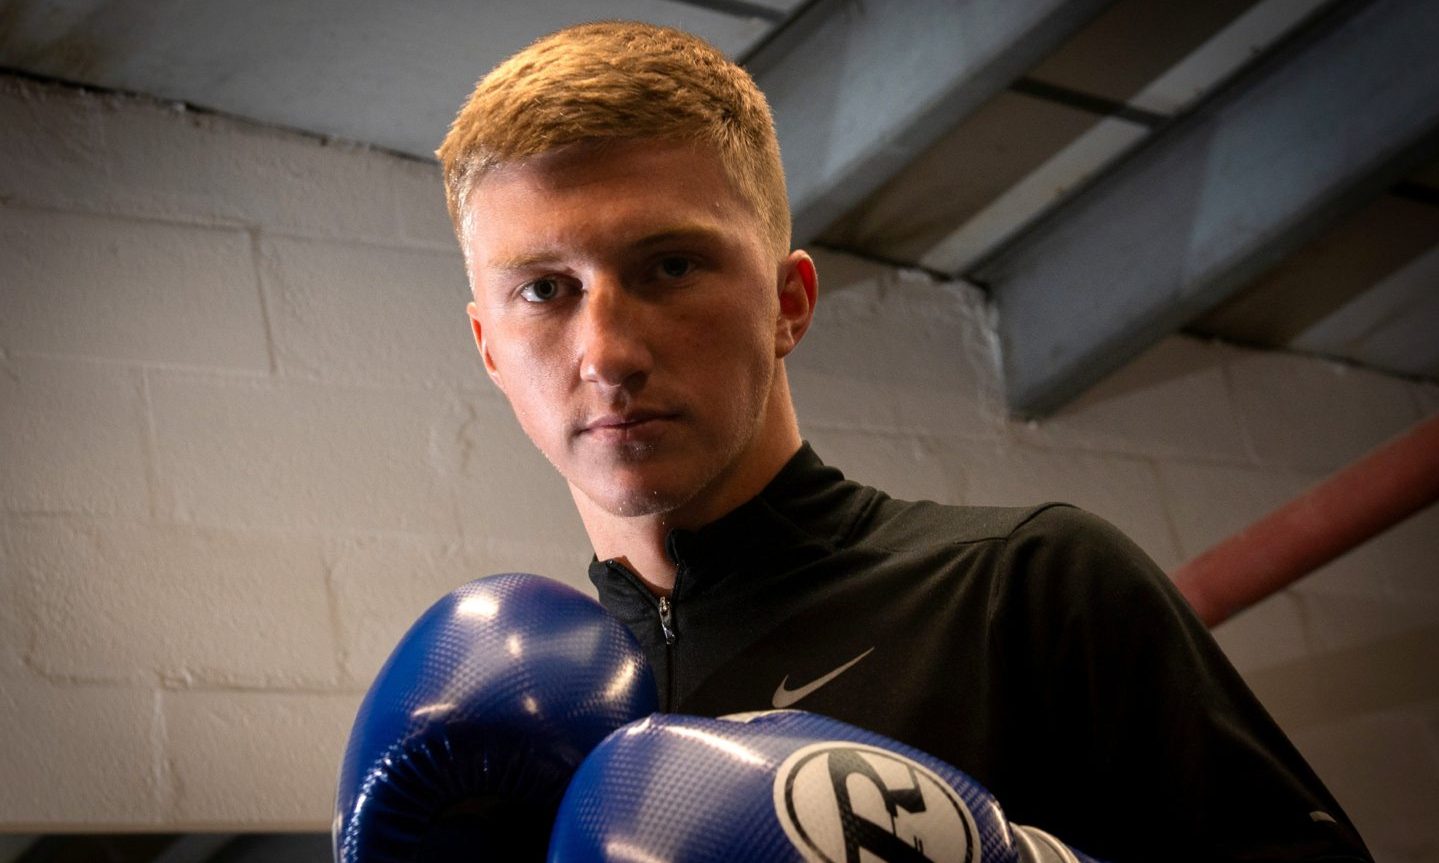 Aberdeen boxer Gregor McPherson during a training session. Image: Kath Flannery/DC Thomson